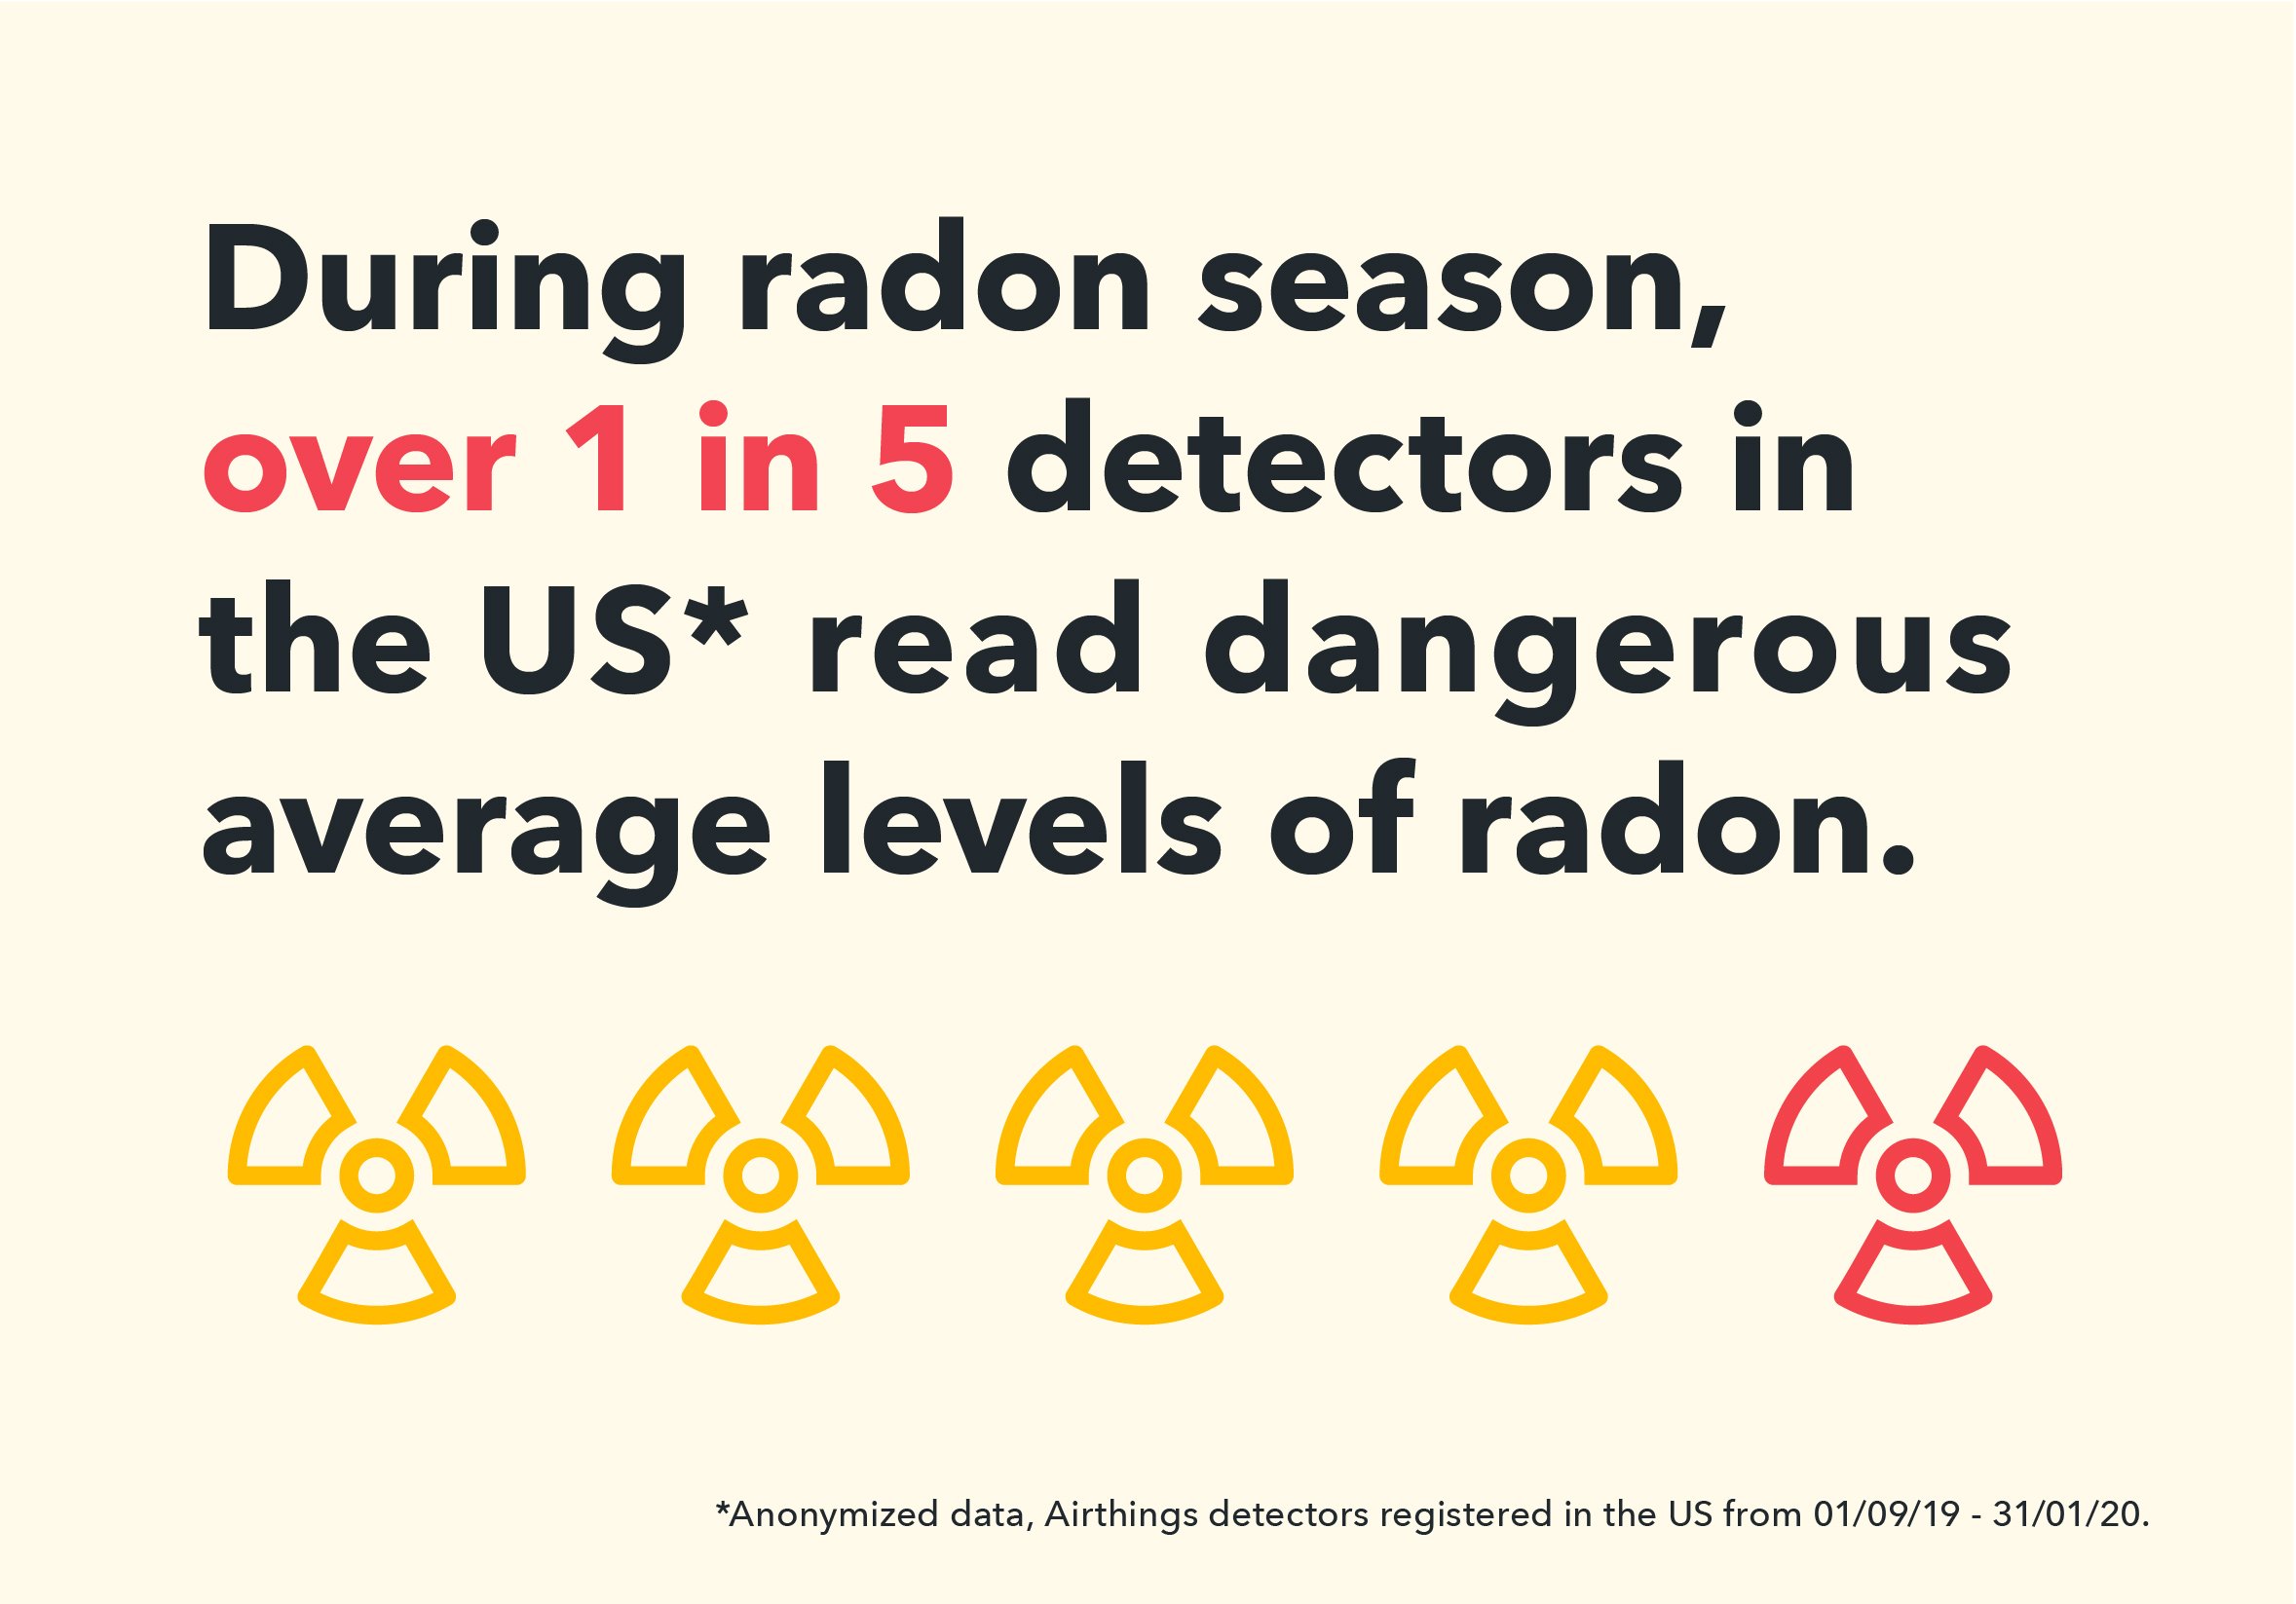 Radon exposure is rising steadily within the modern North American  residential environment, and is increasingly uniform across seasons -  Scientific Reports